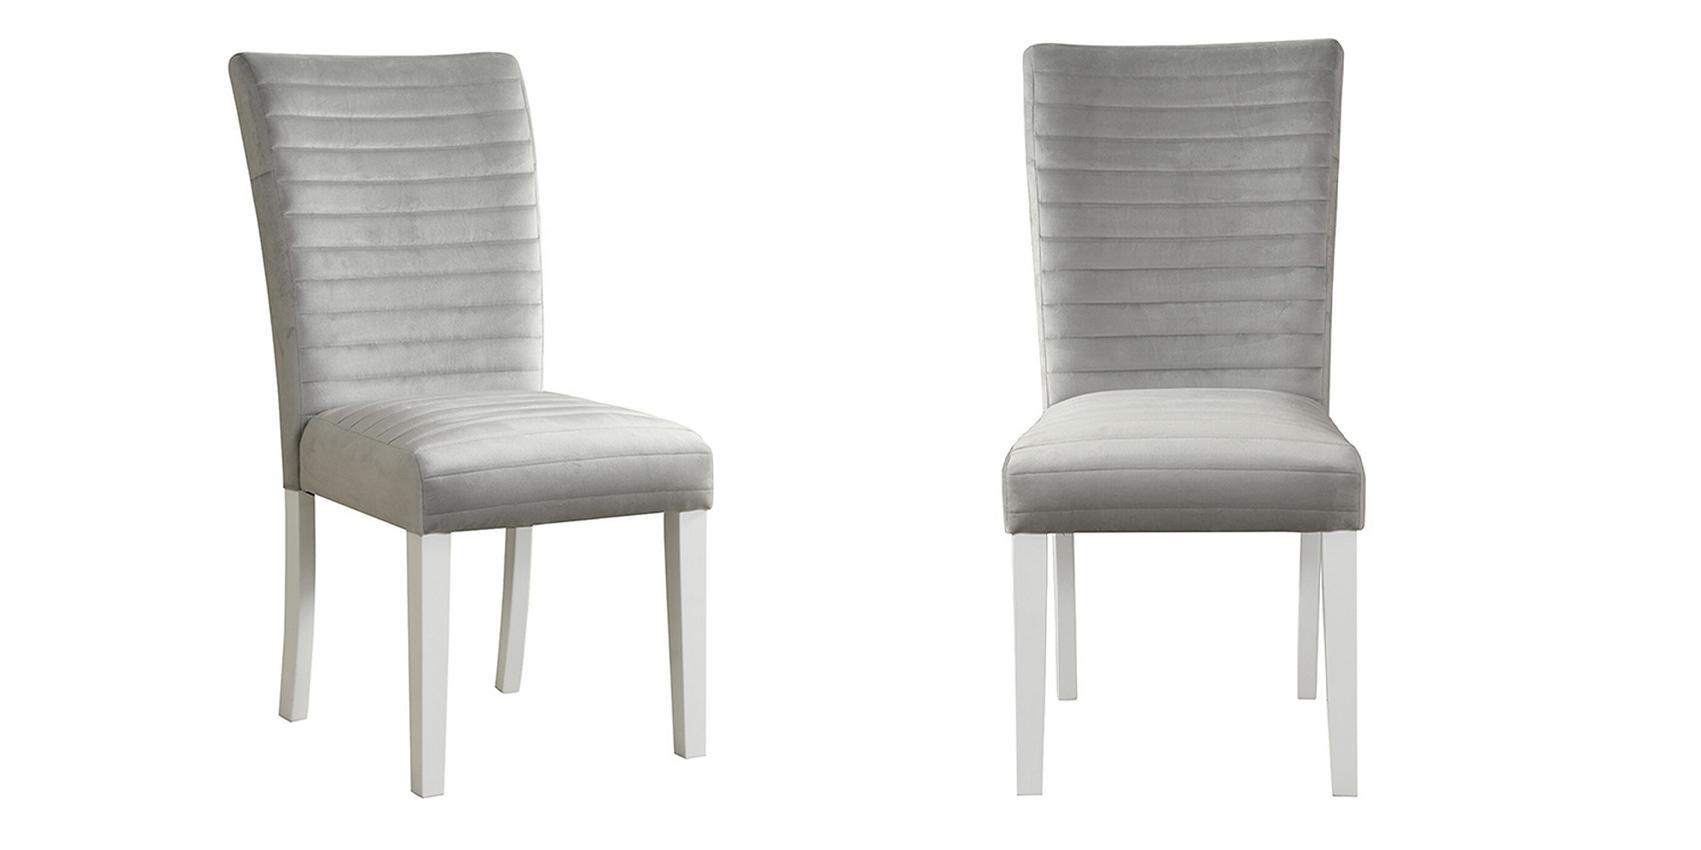 Contemporary Dining Chair Set D1903DC-GRY D1903DC-GRY-Set-2 in Light Grey, White Velvet